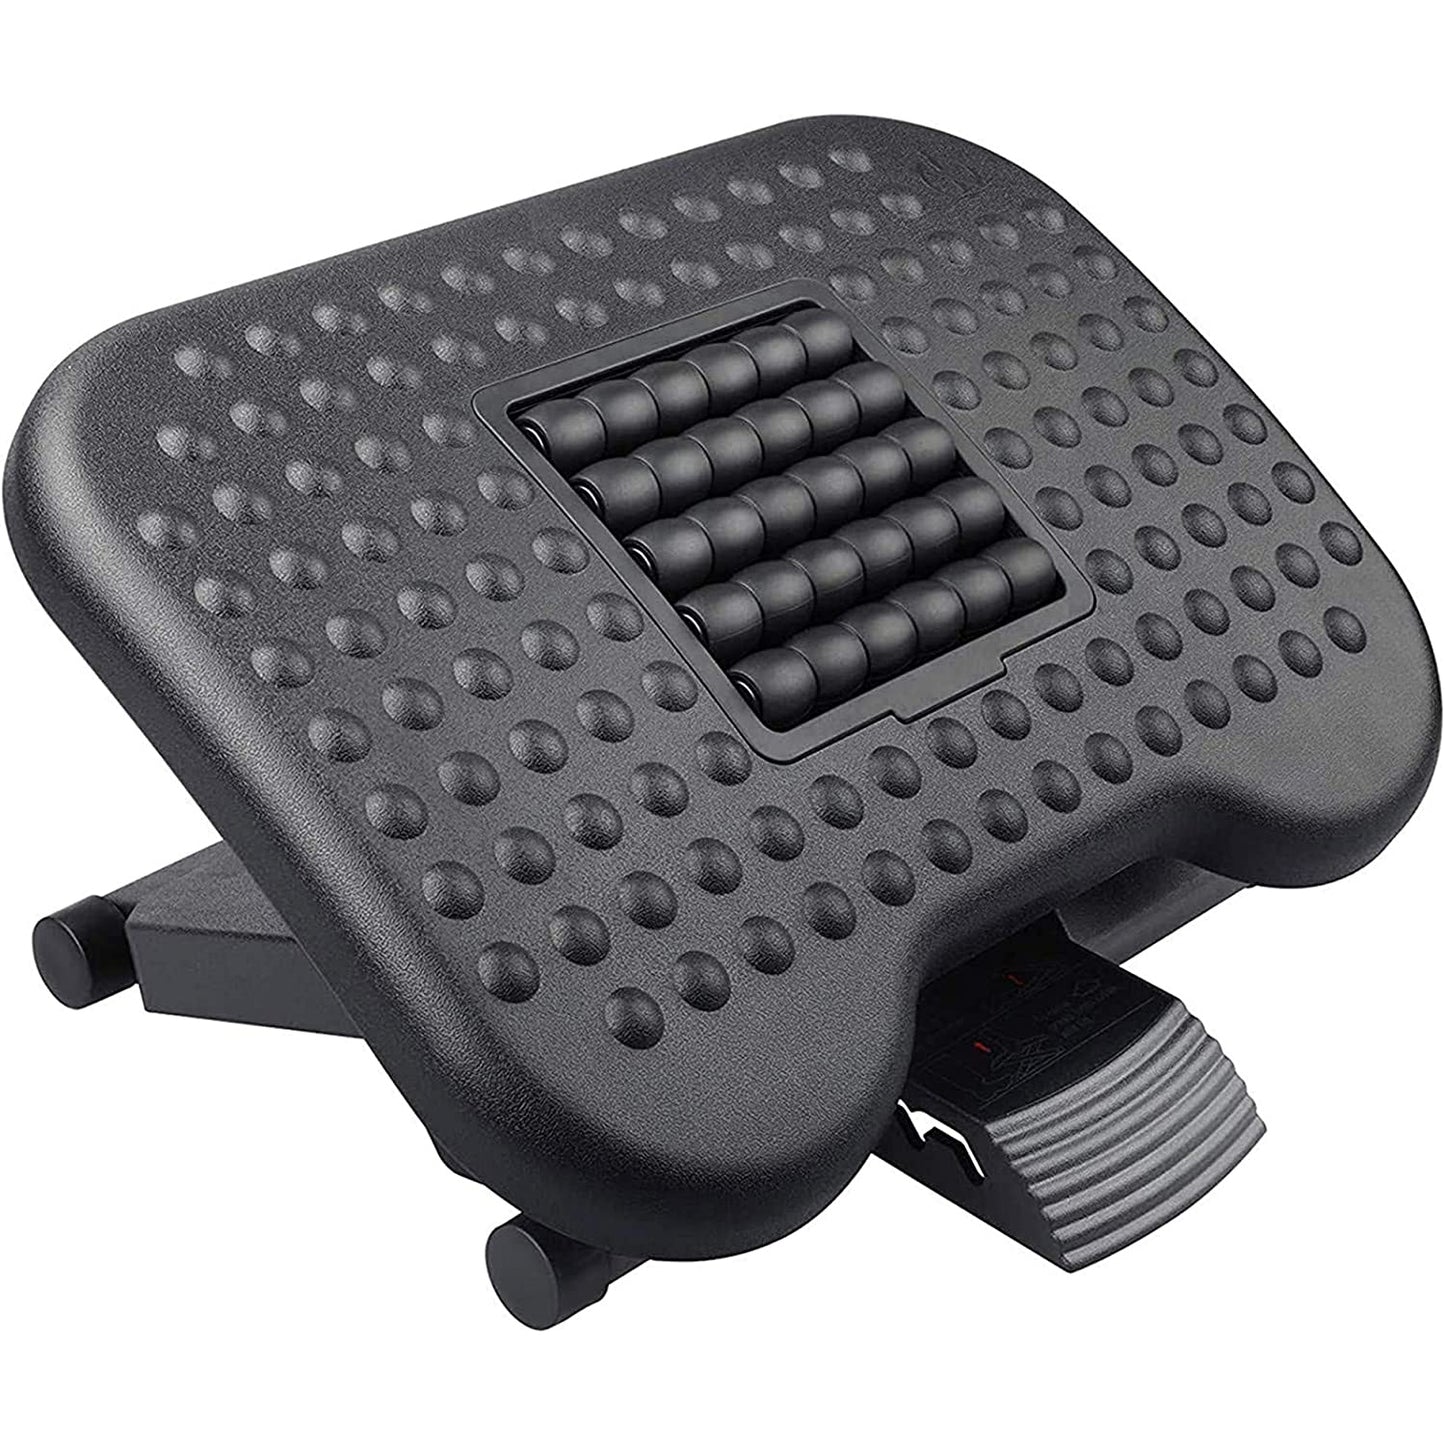 https://www.huanuo.com/cdn/shop/products/HUANUO-Footrest-Under-Desk---Adjustable-Foot-Rest-with-Massage-Texture-and-Roller_-Ergonomic-Foot-Rest-with-3-Height-Position_-30-Degree-Tilt-Angle-Adjustment-for-Home_-Office-0.jpg?v=1668512525&width=1445